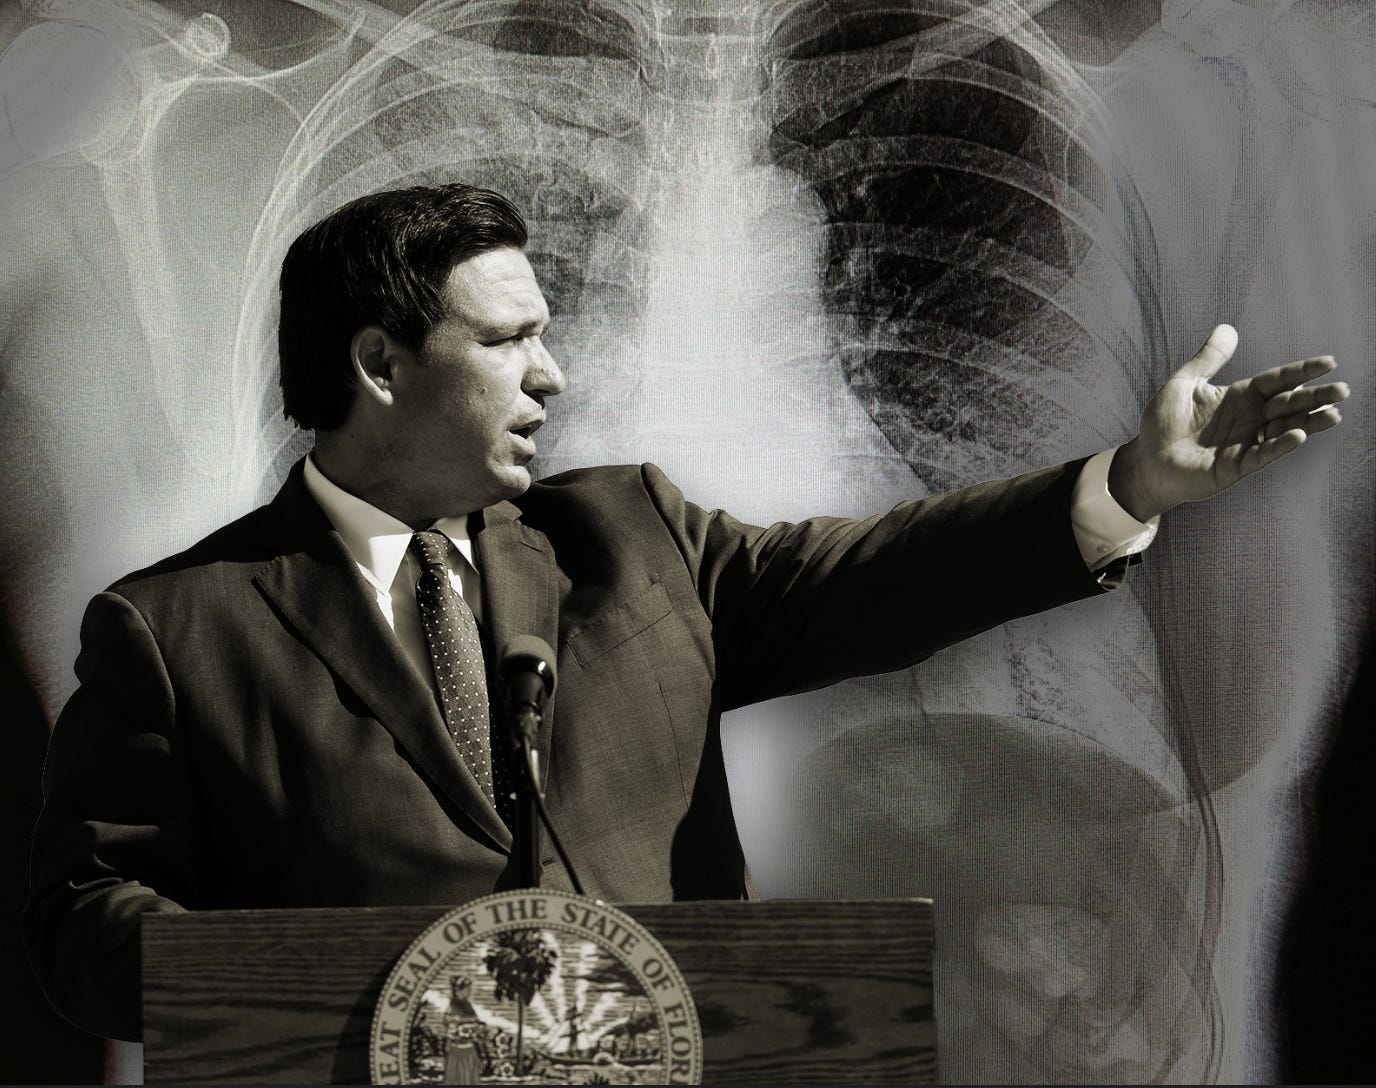 The Wrap: Is Ron DeSantis a member of Skull and Bones? Is he anti-vax? Is  Florida a low vax state?